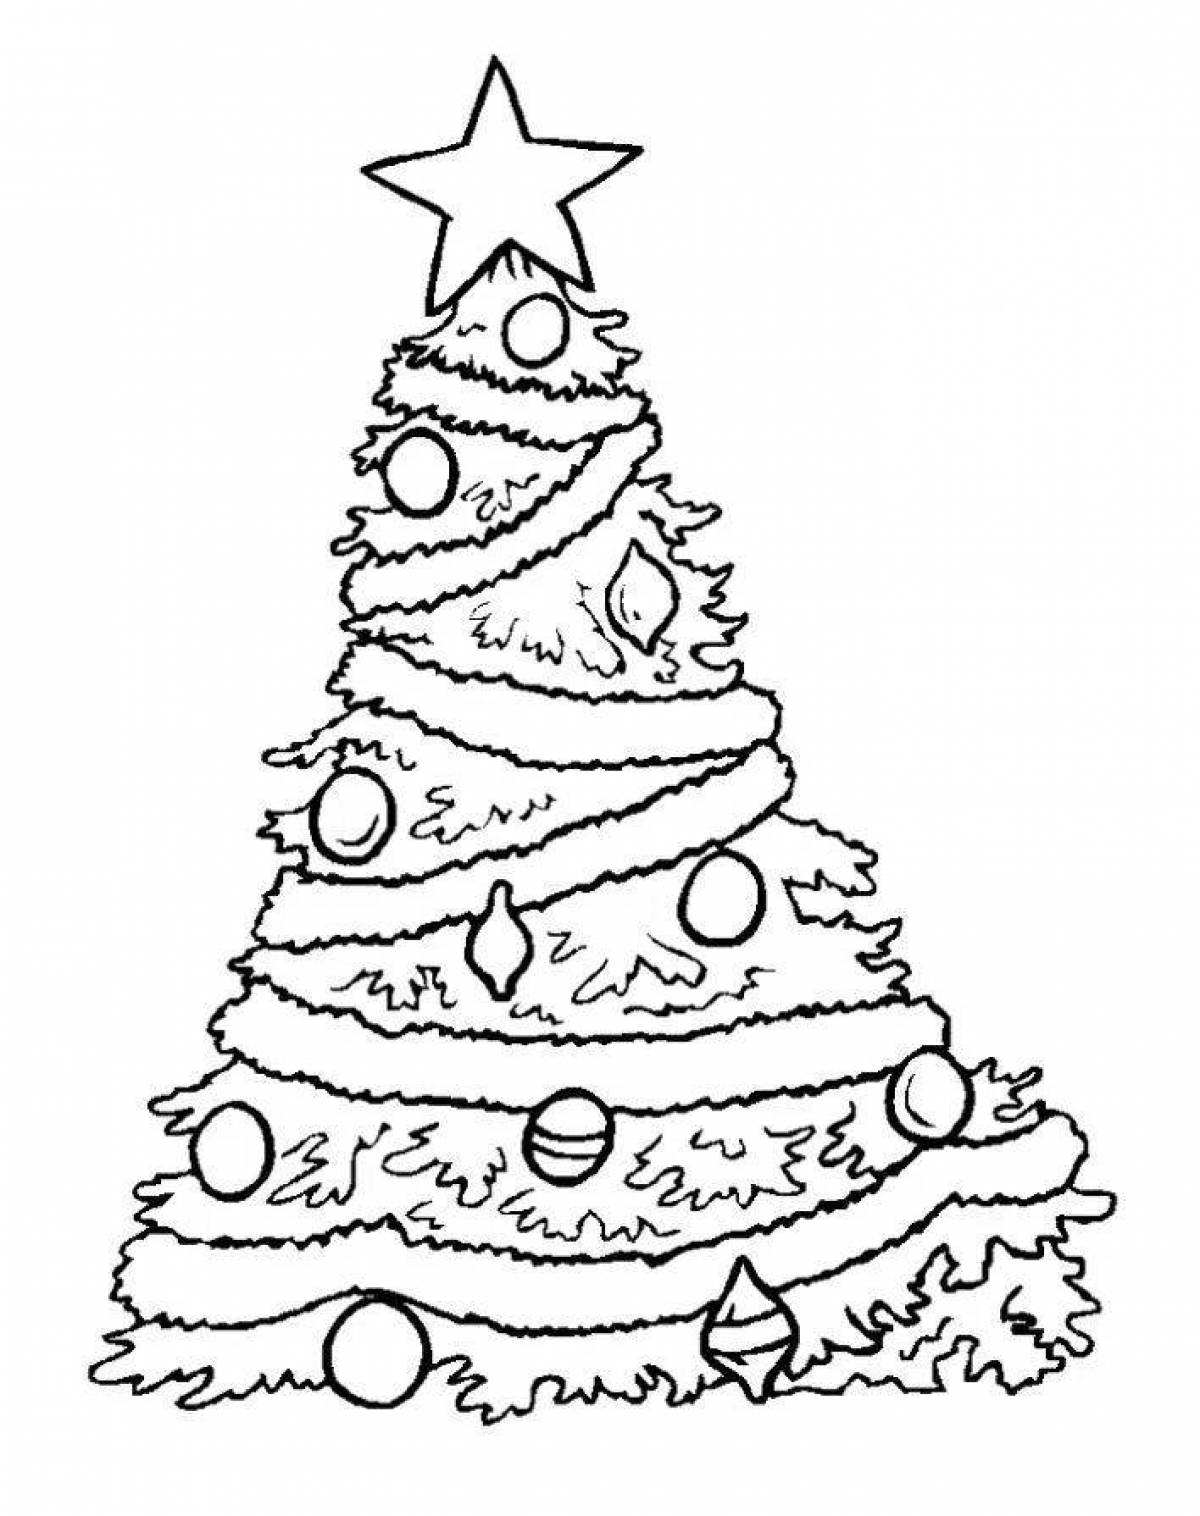 Exquisite Christmas tree coloring book